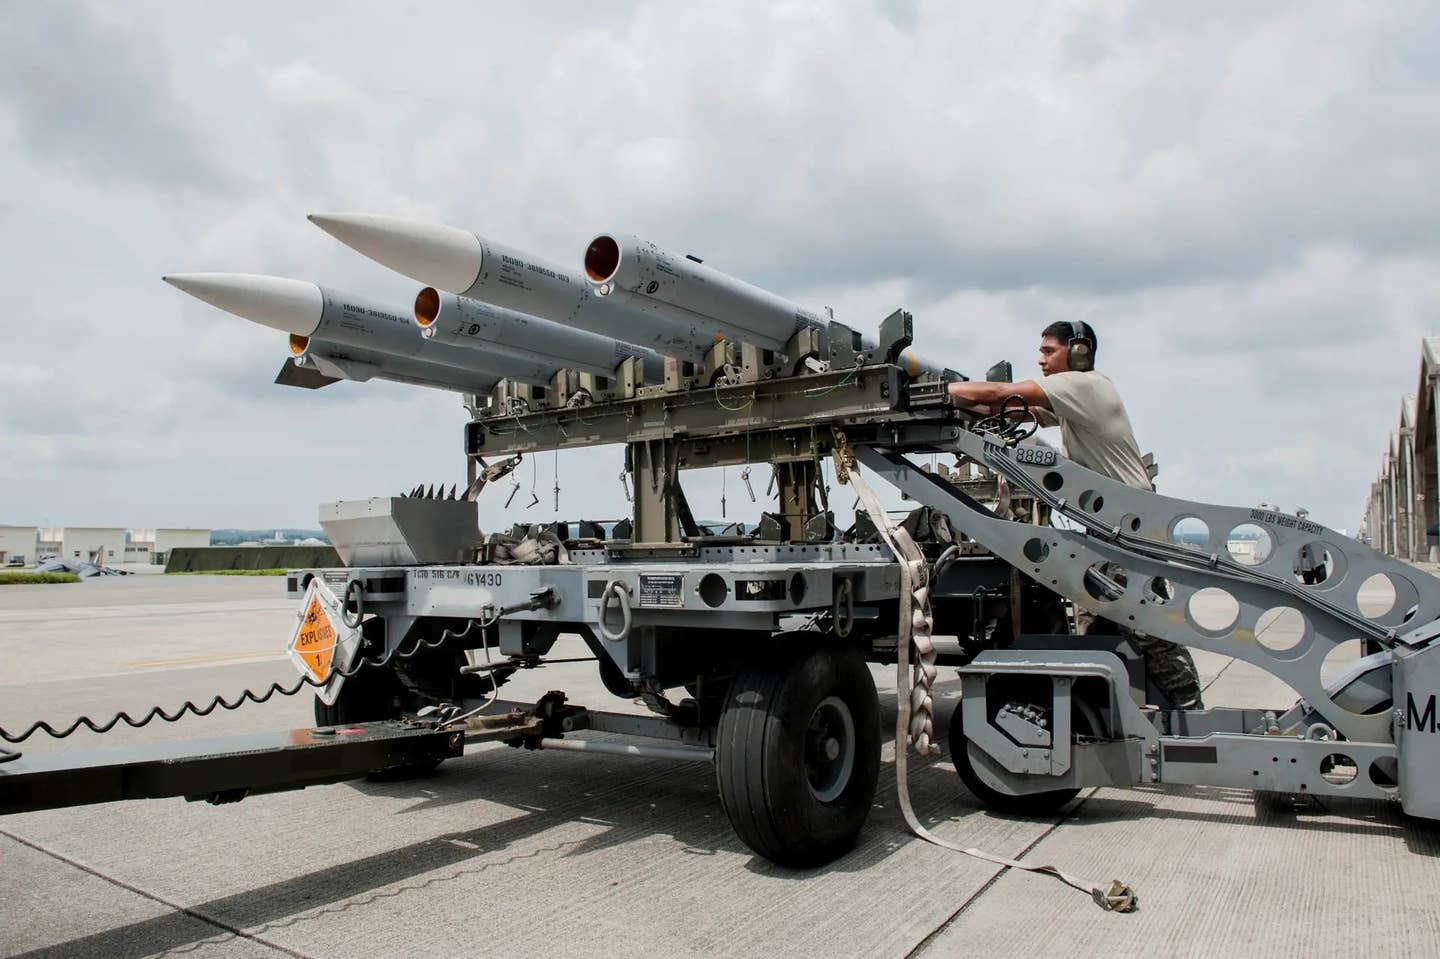 Air Force personnel prepare AIM-120 AMRAAM missiles for loading onto F-15 fighters at Kadena Air Base in Japan during an exercise. <em>USAF</em>